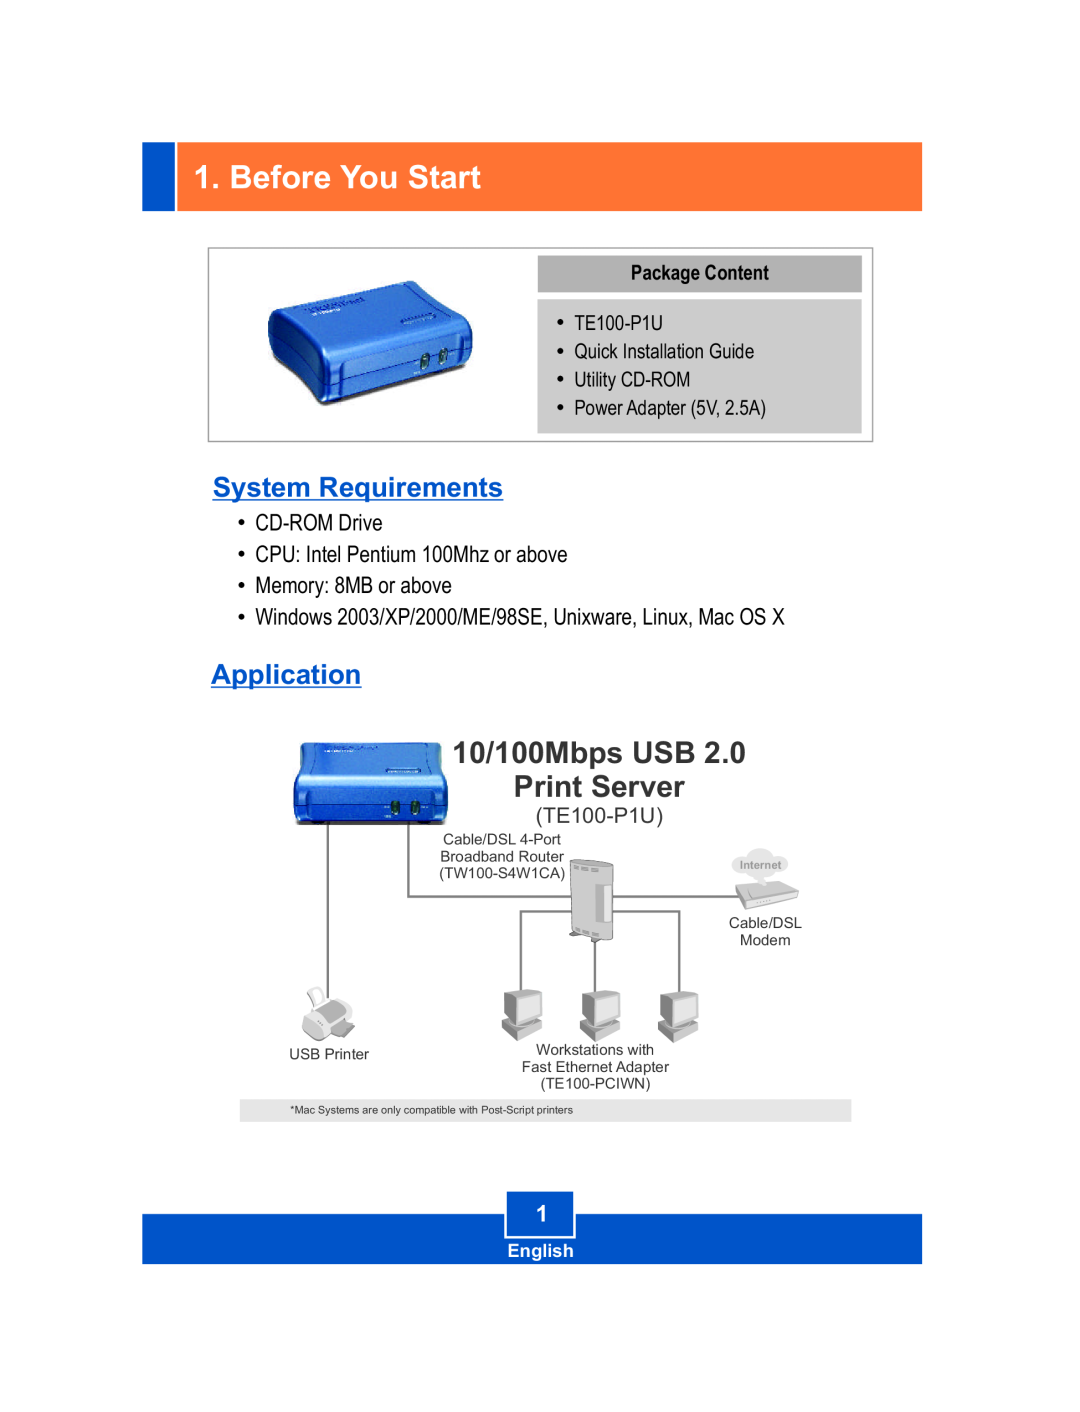 TRENDnet Before You Start, System Requirements, Application, English, 10/100Mbps USB Print Server, Package Content 